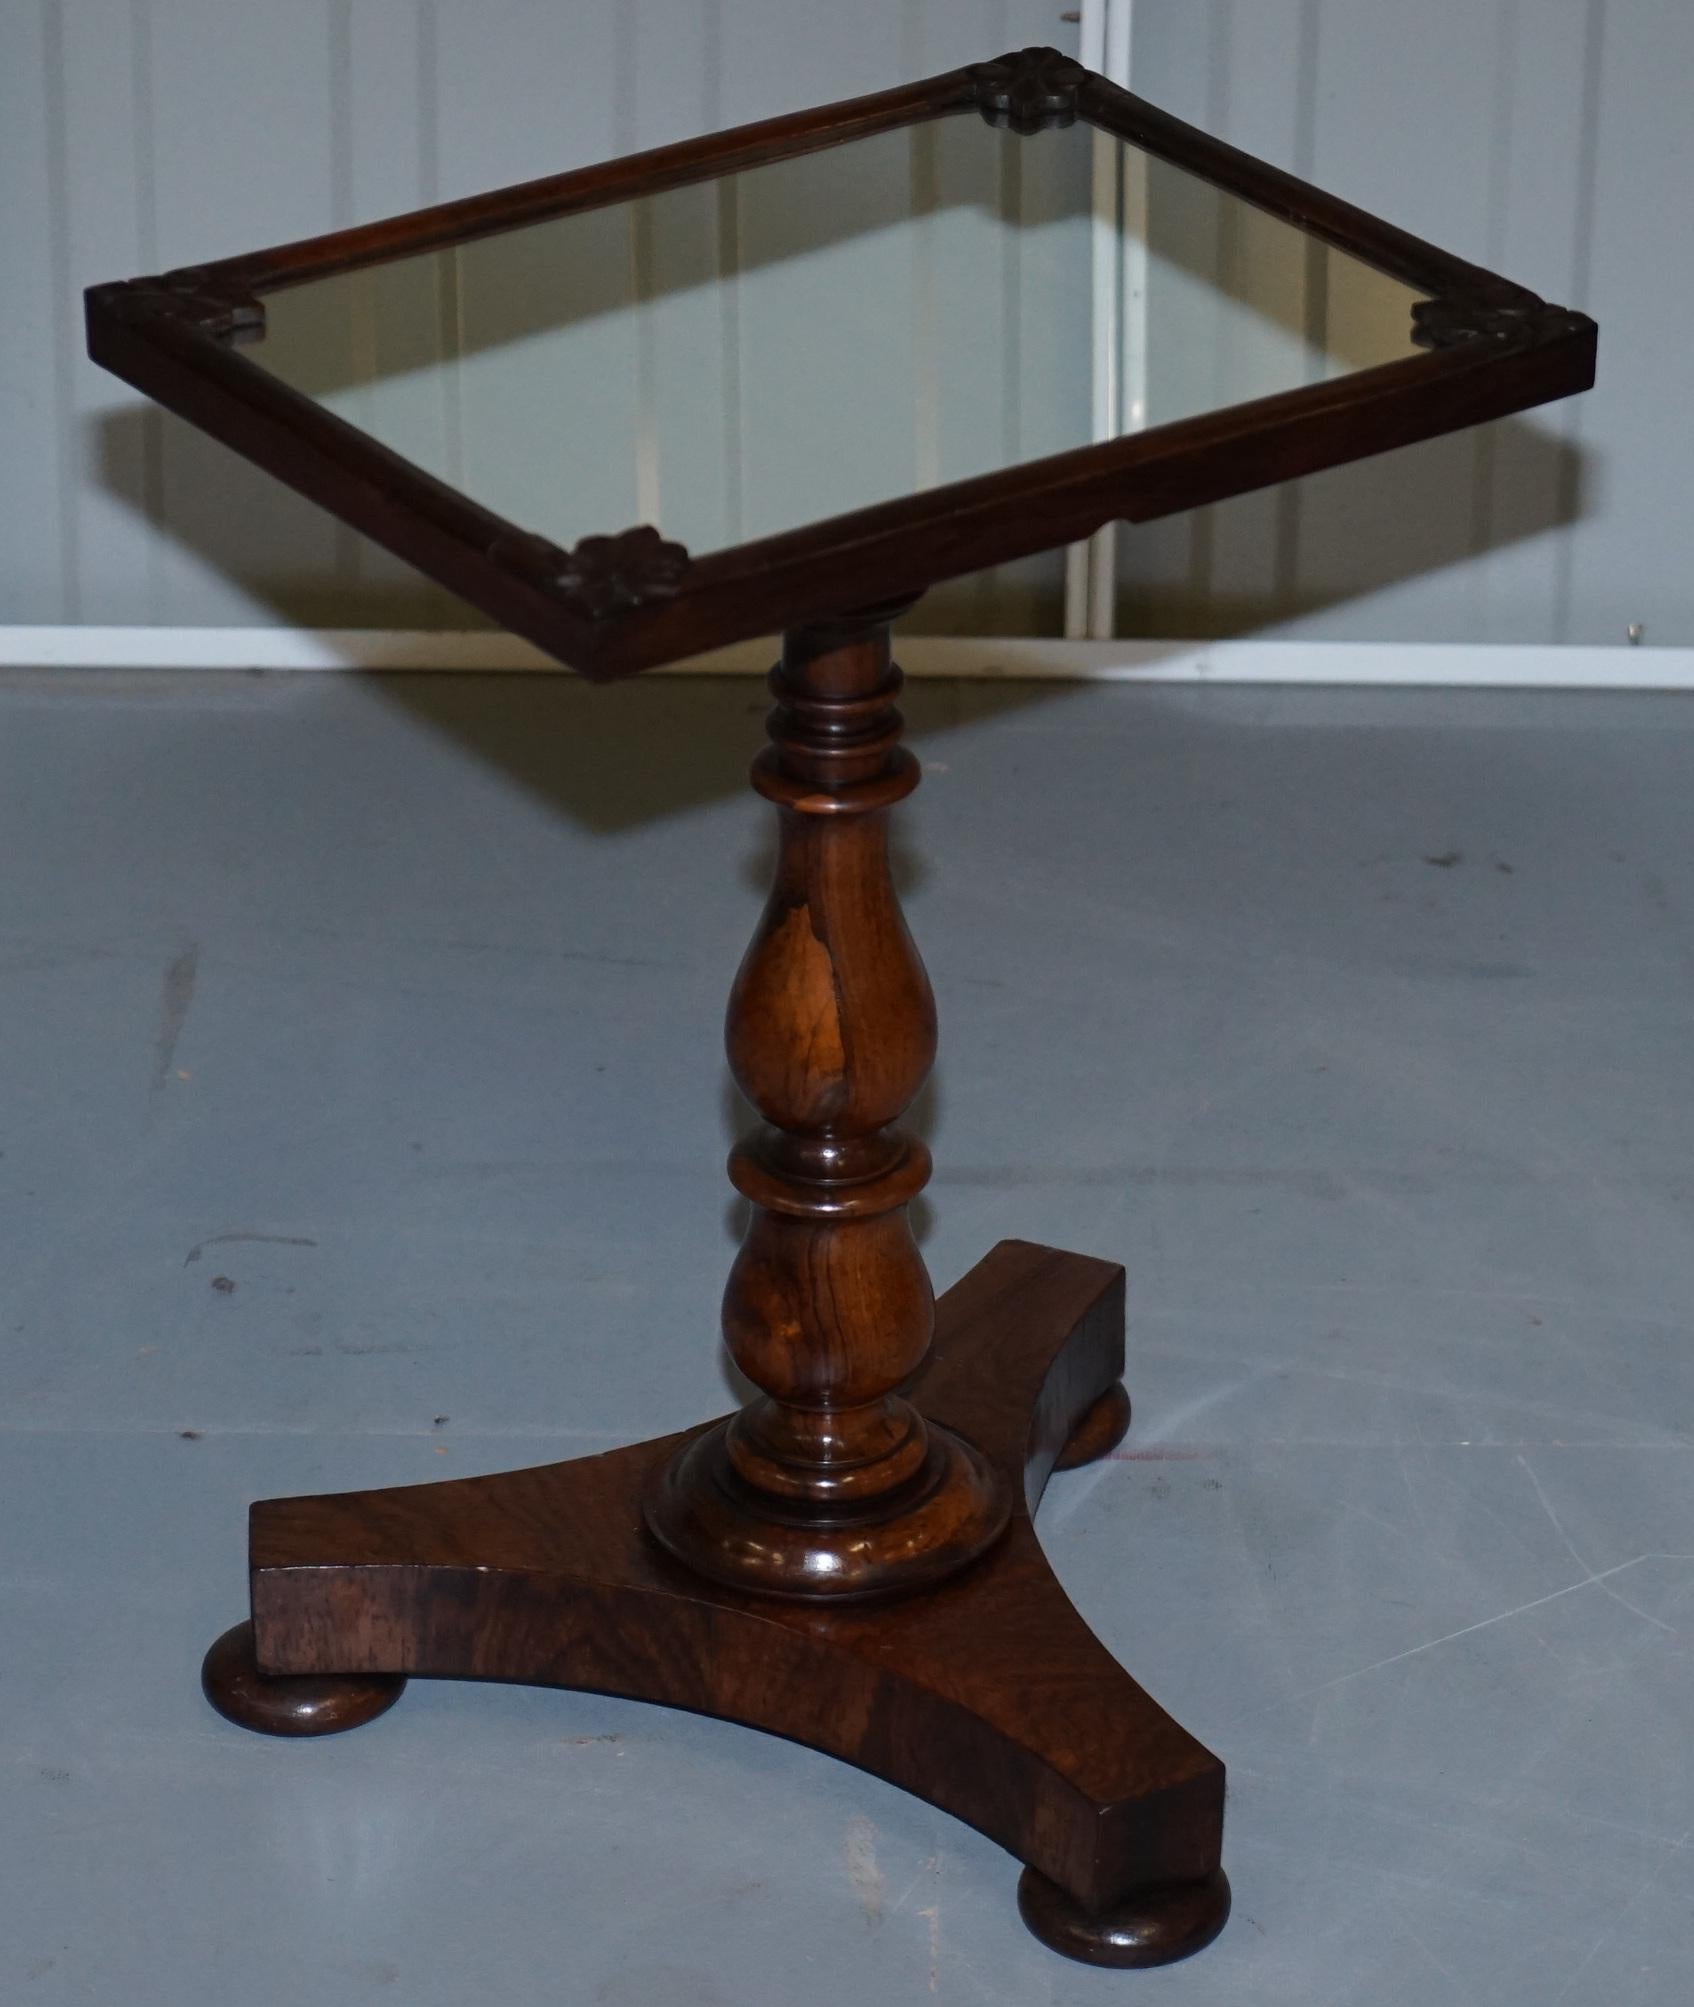 We are delighted to offer for sale this stunning pair of original William IV circa 1830 hardwood mirrored top side tables

A very fine and rare pair of tables, the timber patina is absolutely glorious as are the mirrored tops which I have never